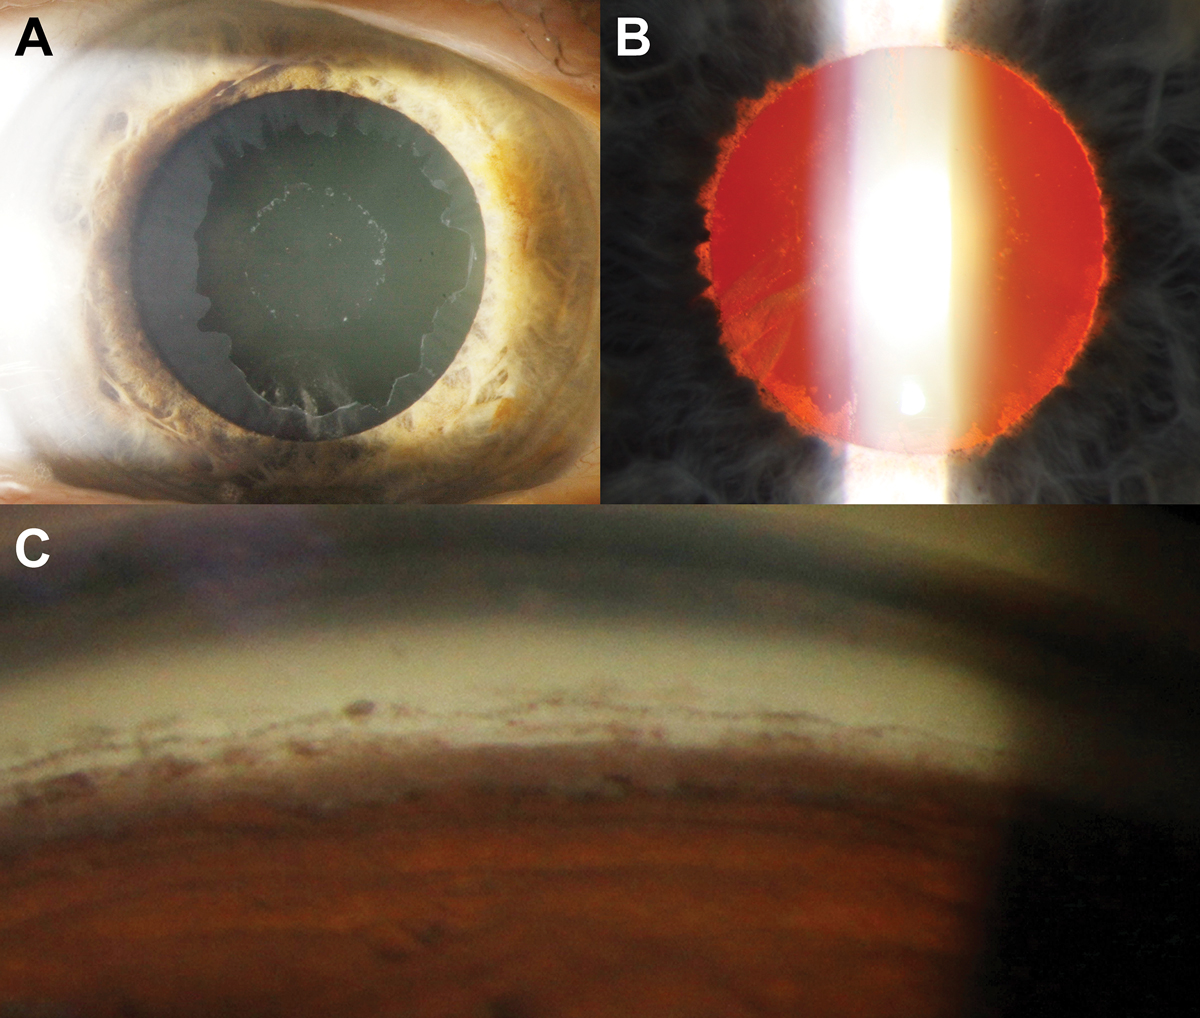 Fig. 3. (A) Bull’s-eye pattern of pseudoexfoliative material on the anterior lens capsule. (B) Retroillumination shows loss of the pupillary ruff as well as peripupillary iris transillumination defects. (C) There is increased but patchy pigmentation (brown sugar-like appearance) of the trabecular meshwork on gonioscopy as well as Sampaolesi’s line. The inferior angle typically appears more pigmented compared with the other angles.